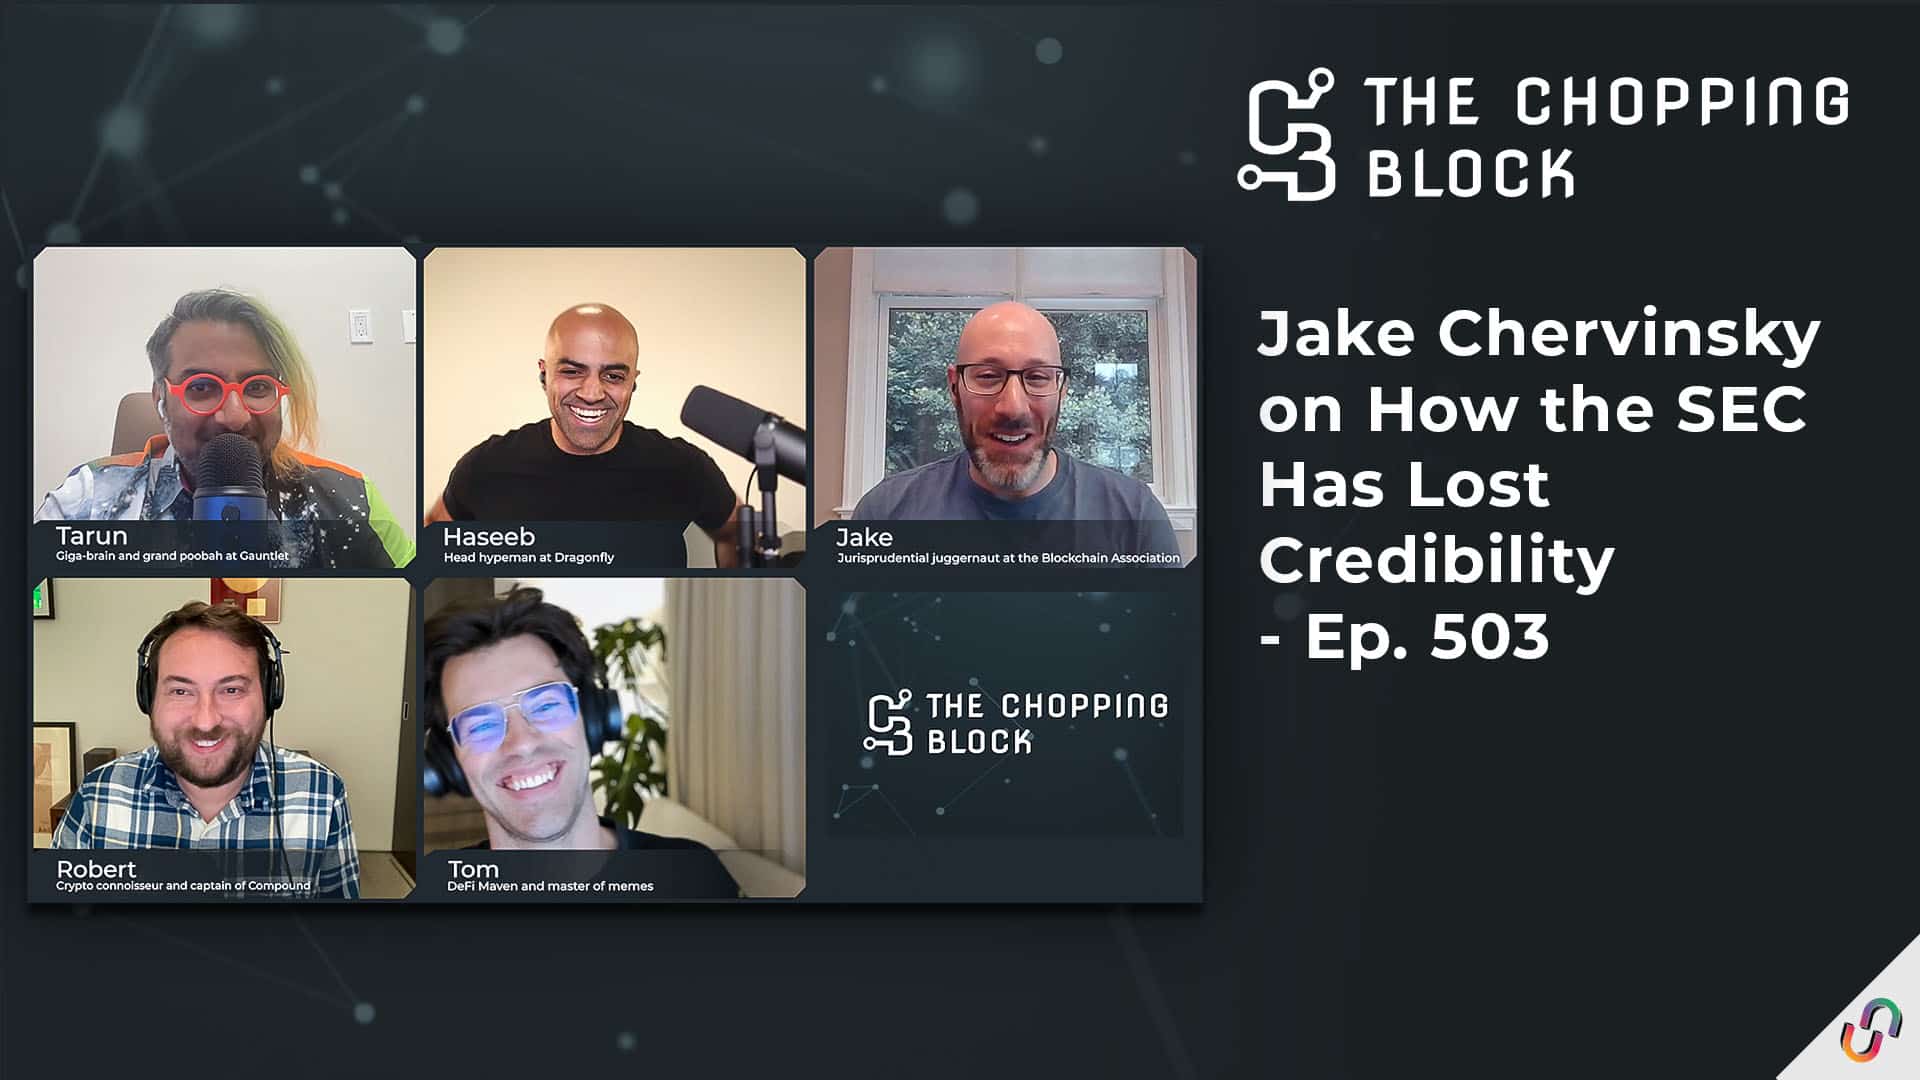 The Chopping Block: Jake Chervinsky on How the SEC Has Lost Credibility - Ep. 503